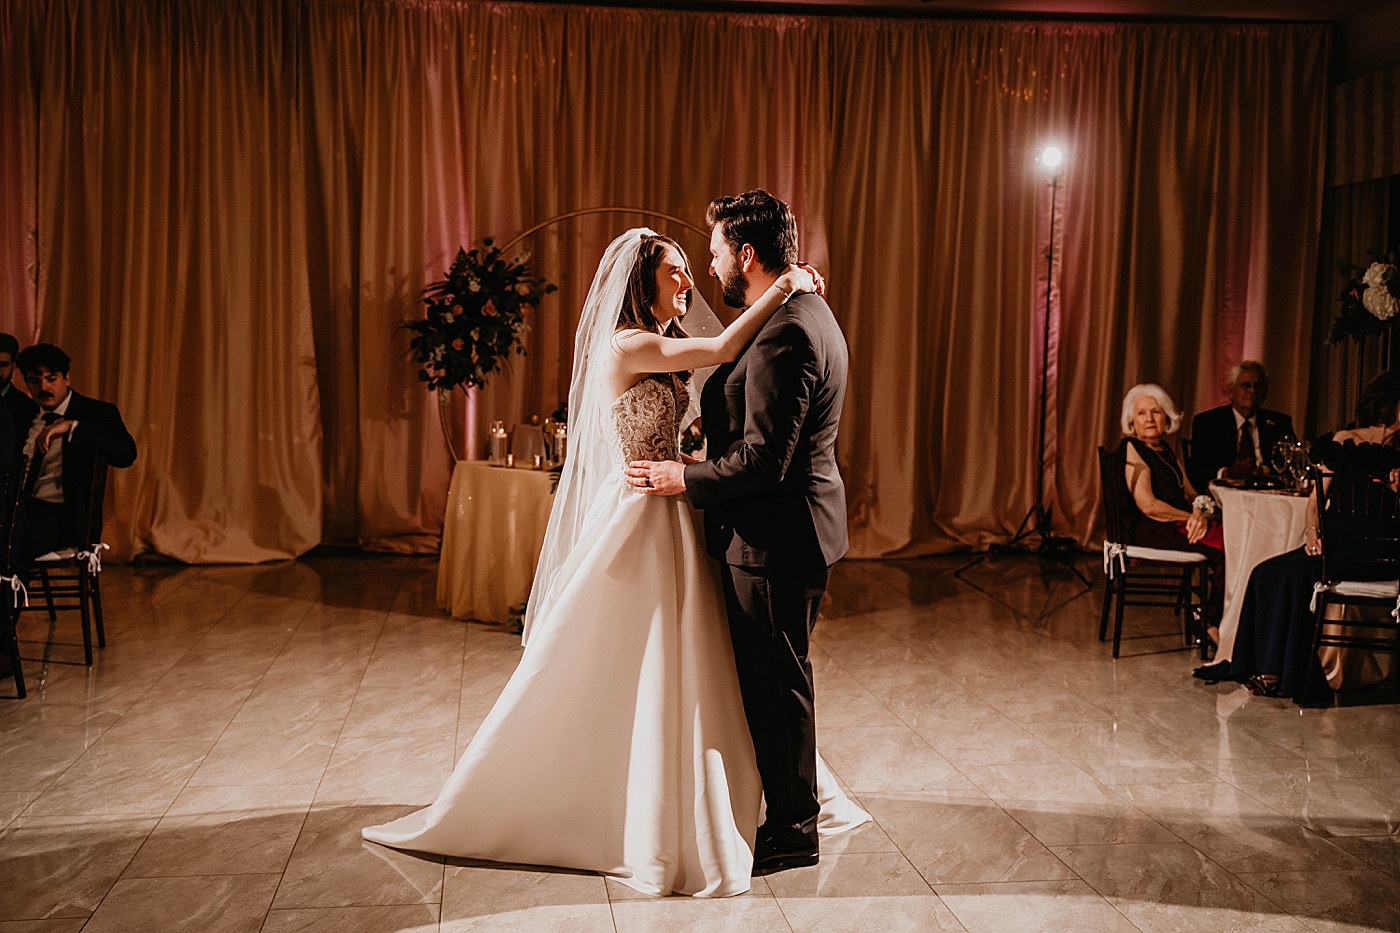 Bride and Groom laughing having fun during first dance at reception warm lighting Romantic Winter Wedding captured NYC Wedding Planner Poppy and Lynn